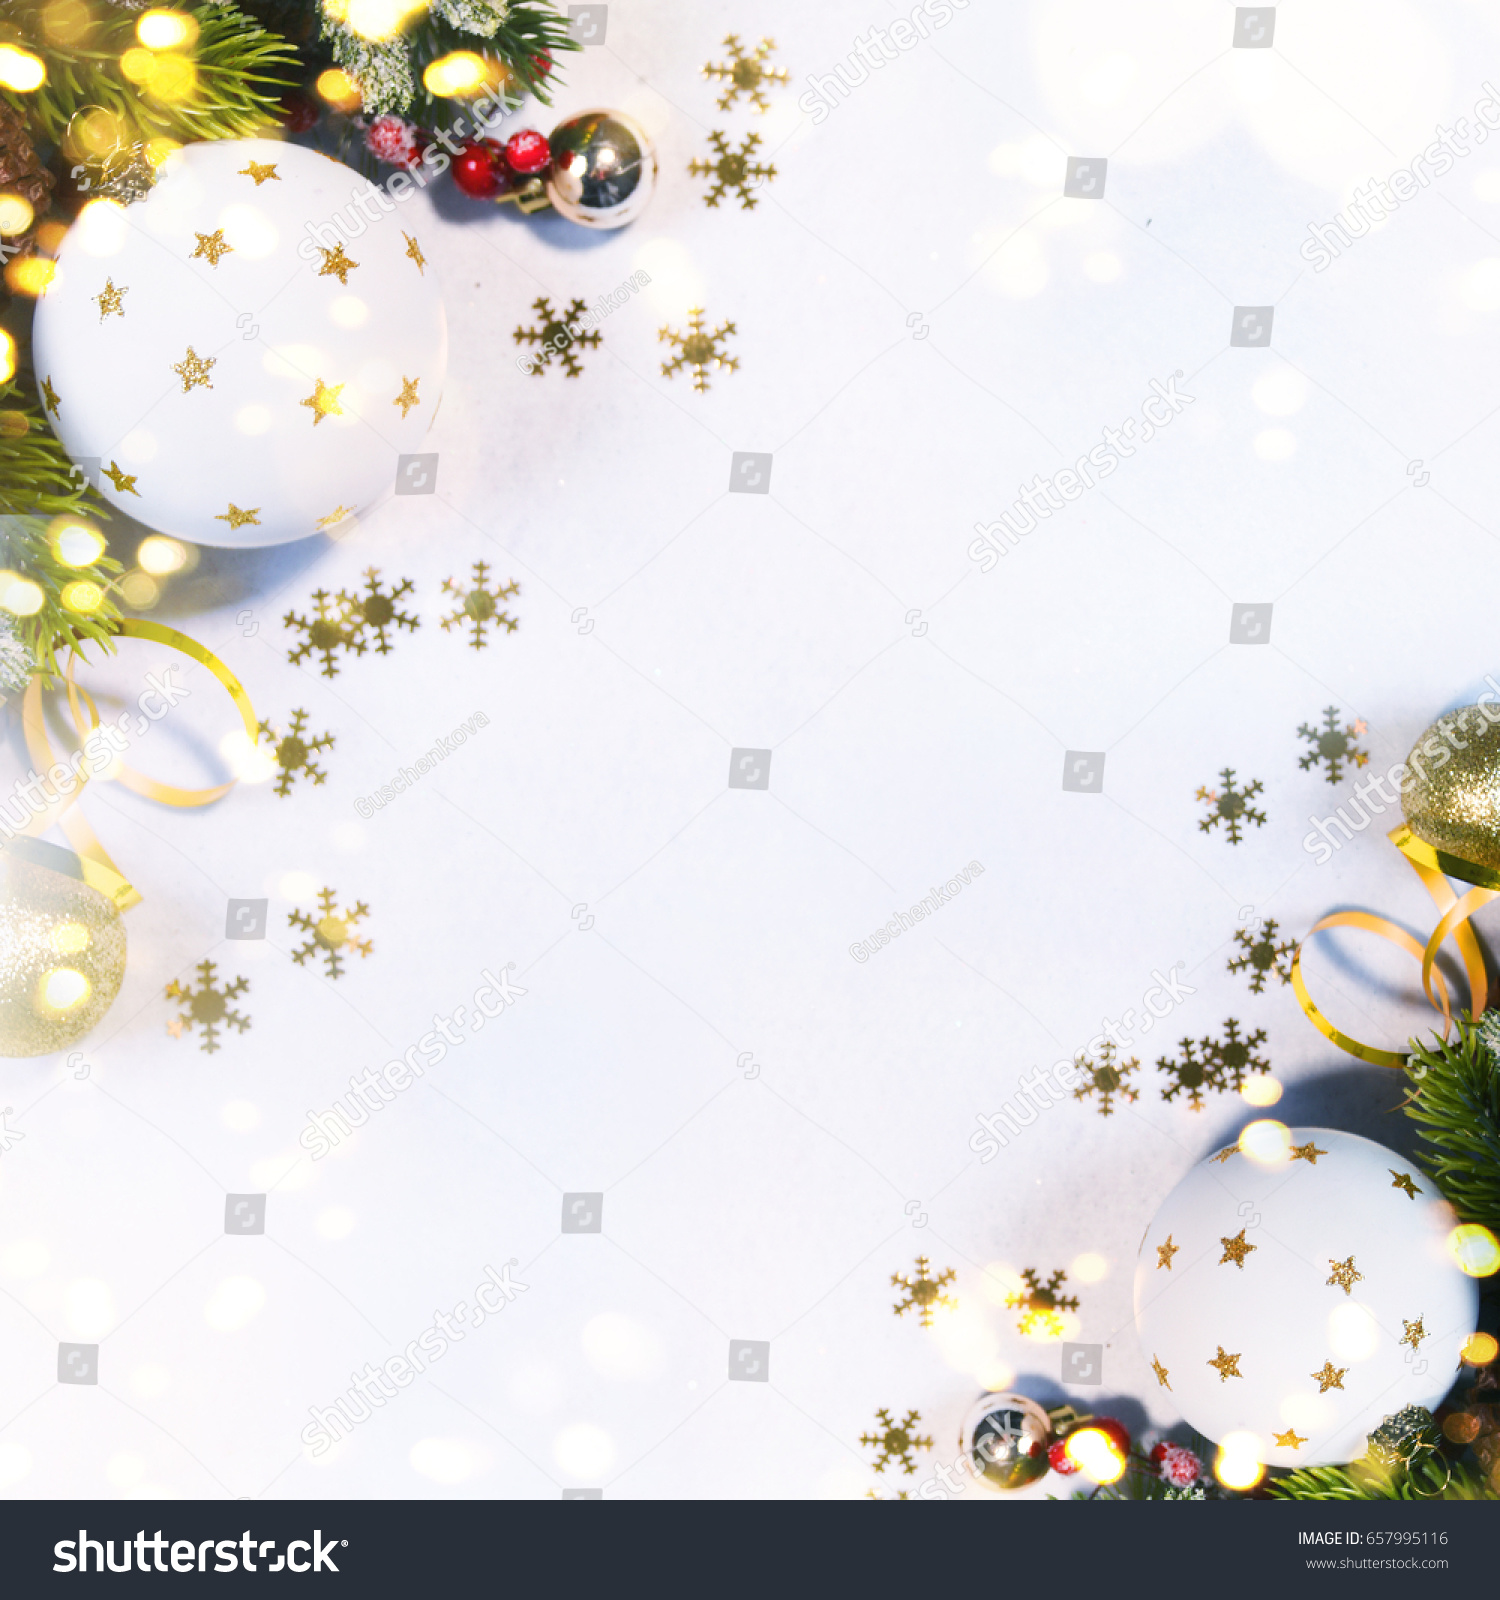 Holiday background, greeting card for Christmas and New Year #657995116